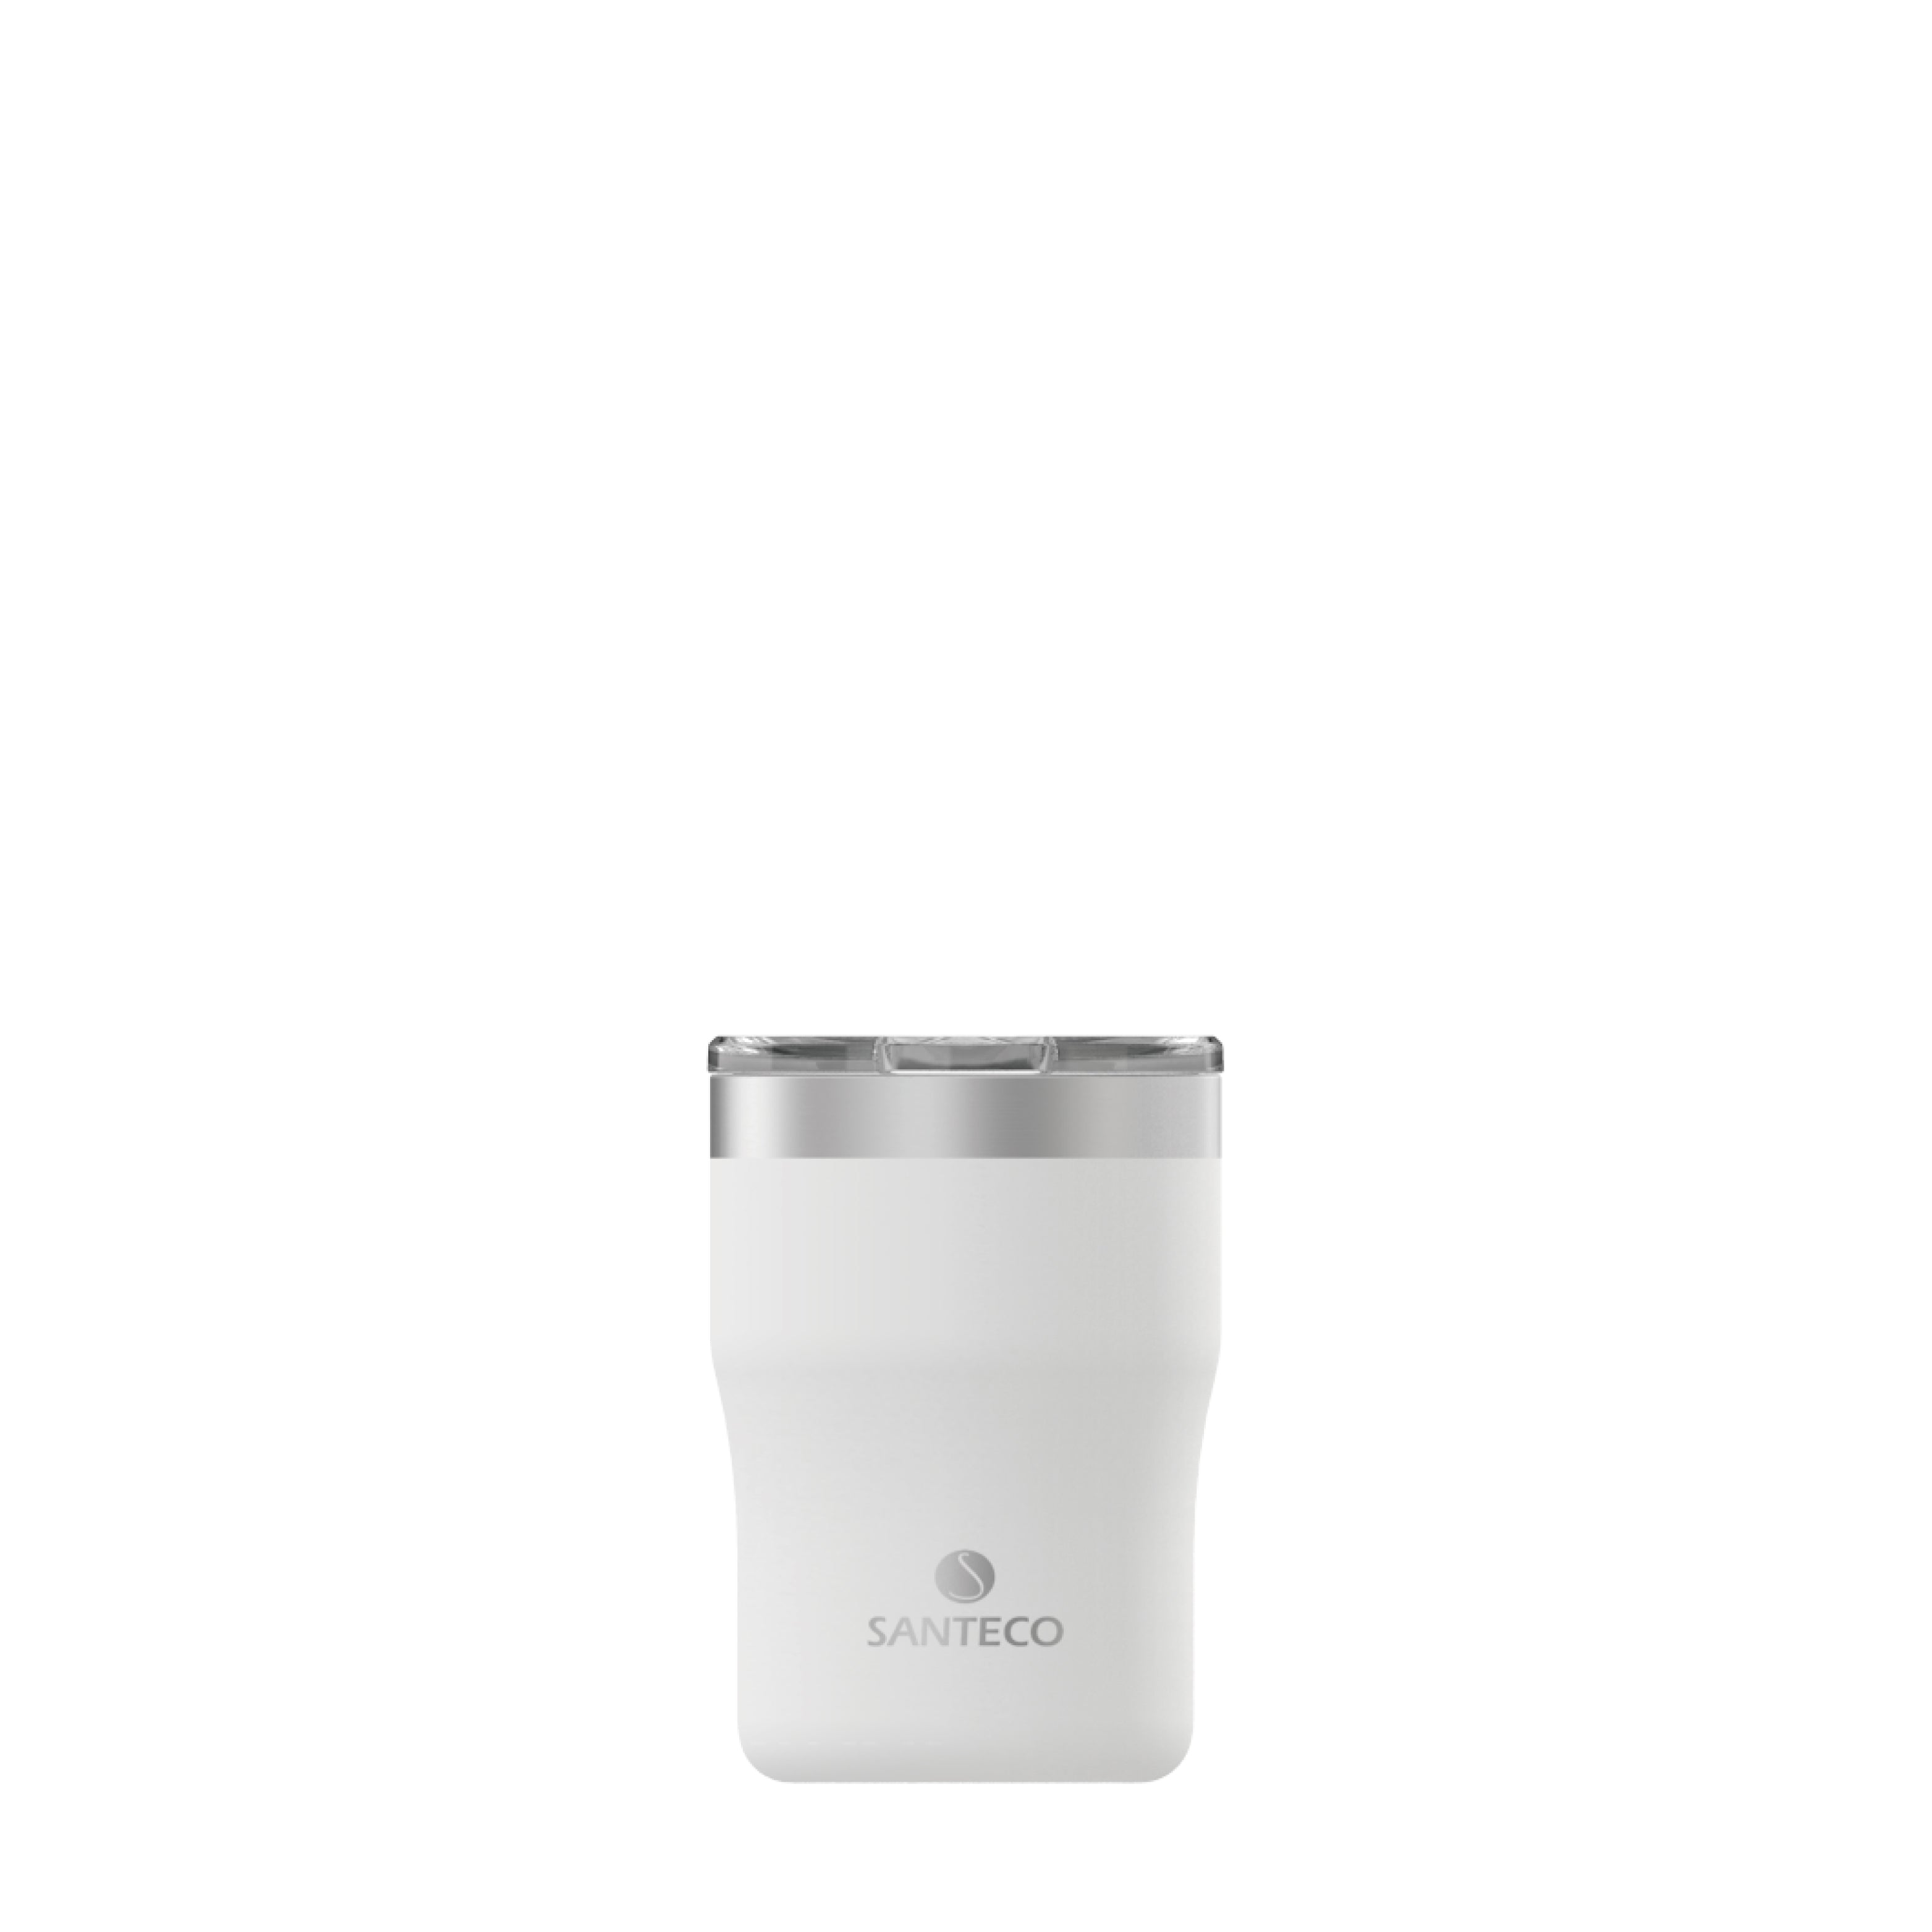 SANTECO Nora 10 oz, Thermal Tumbler, Stainless Steel, Vacuum Insulated